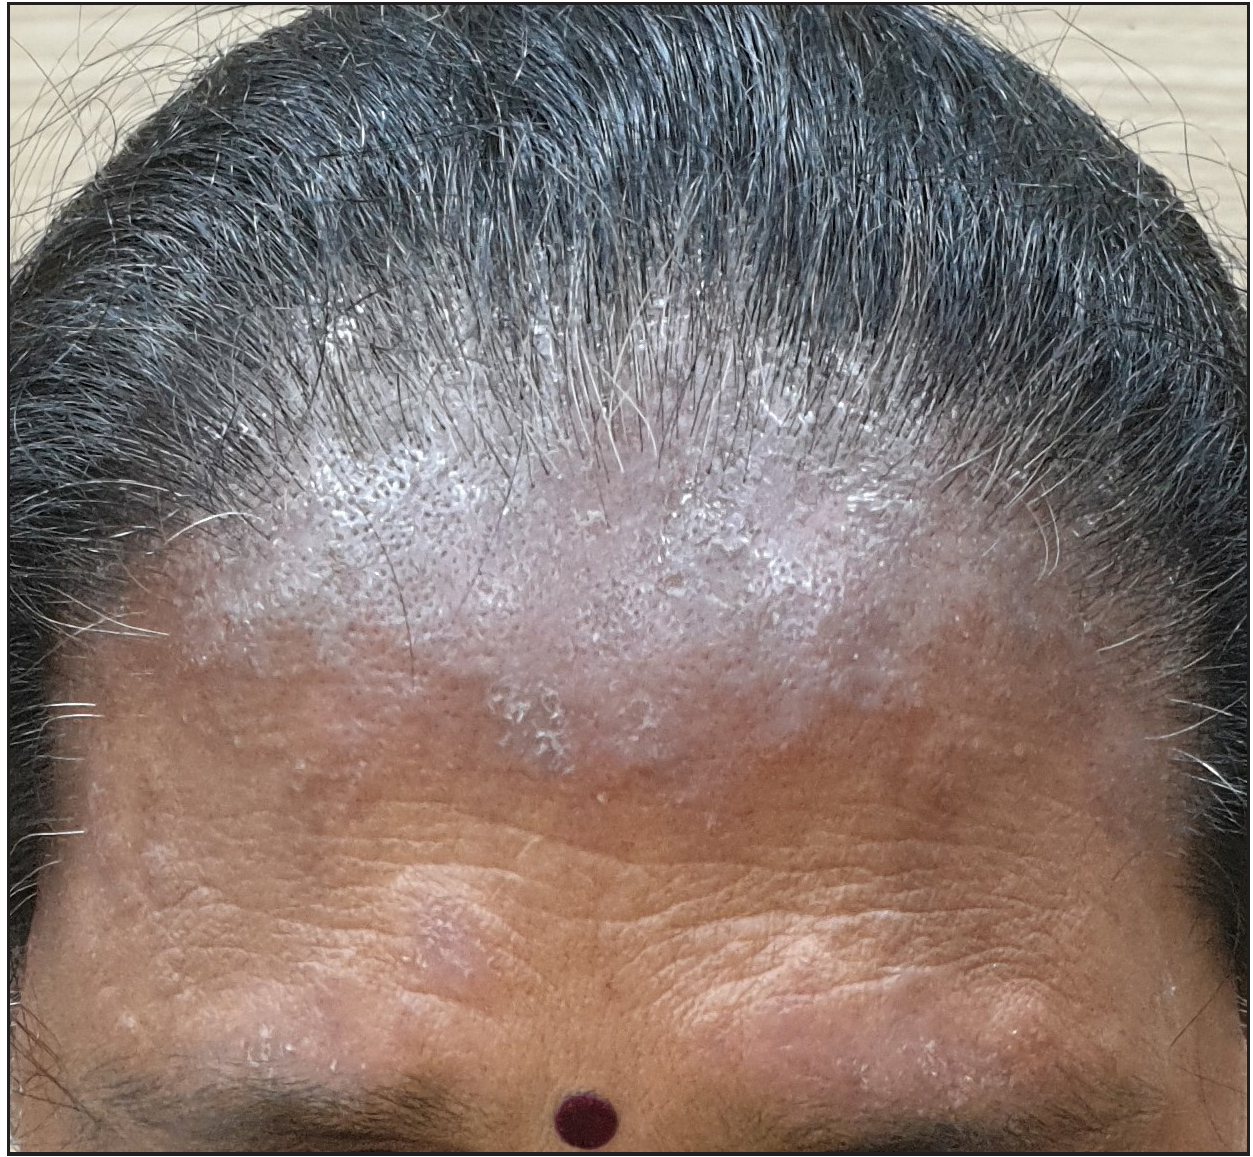 Allergic contact dermatitis to hair dye extending from anterior hairline to forehead.